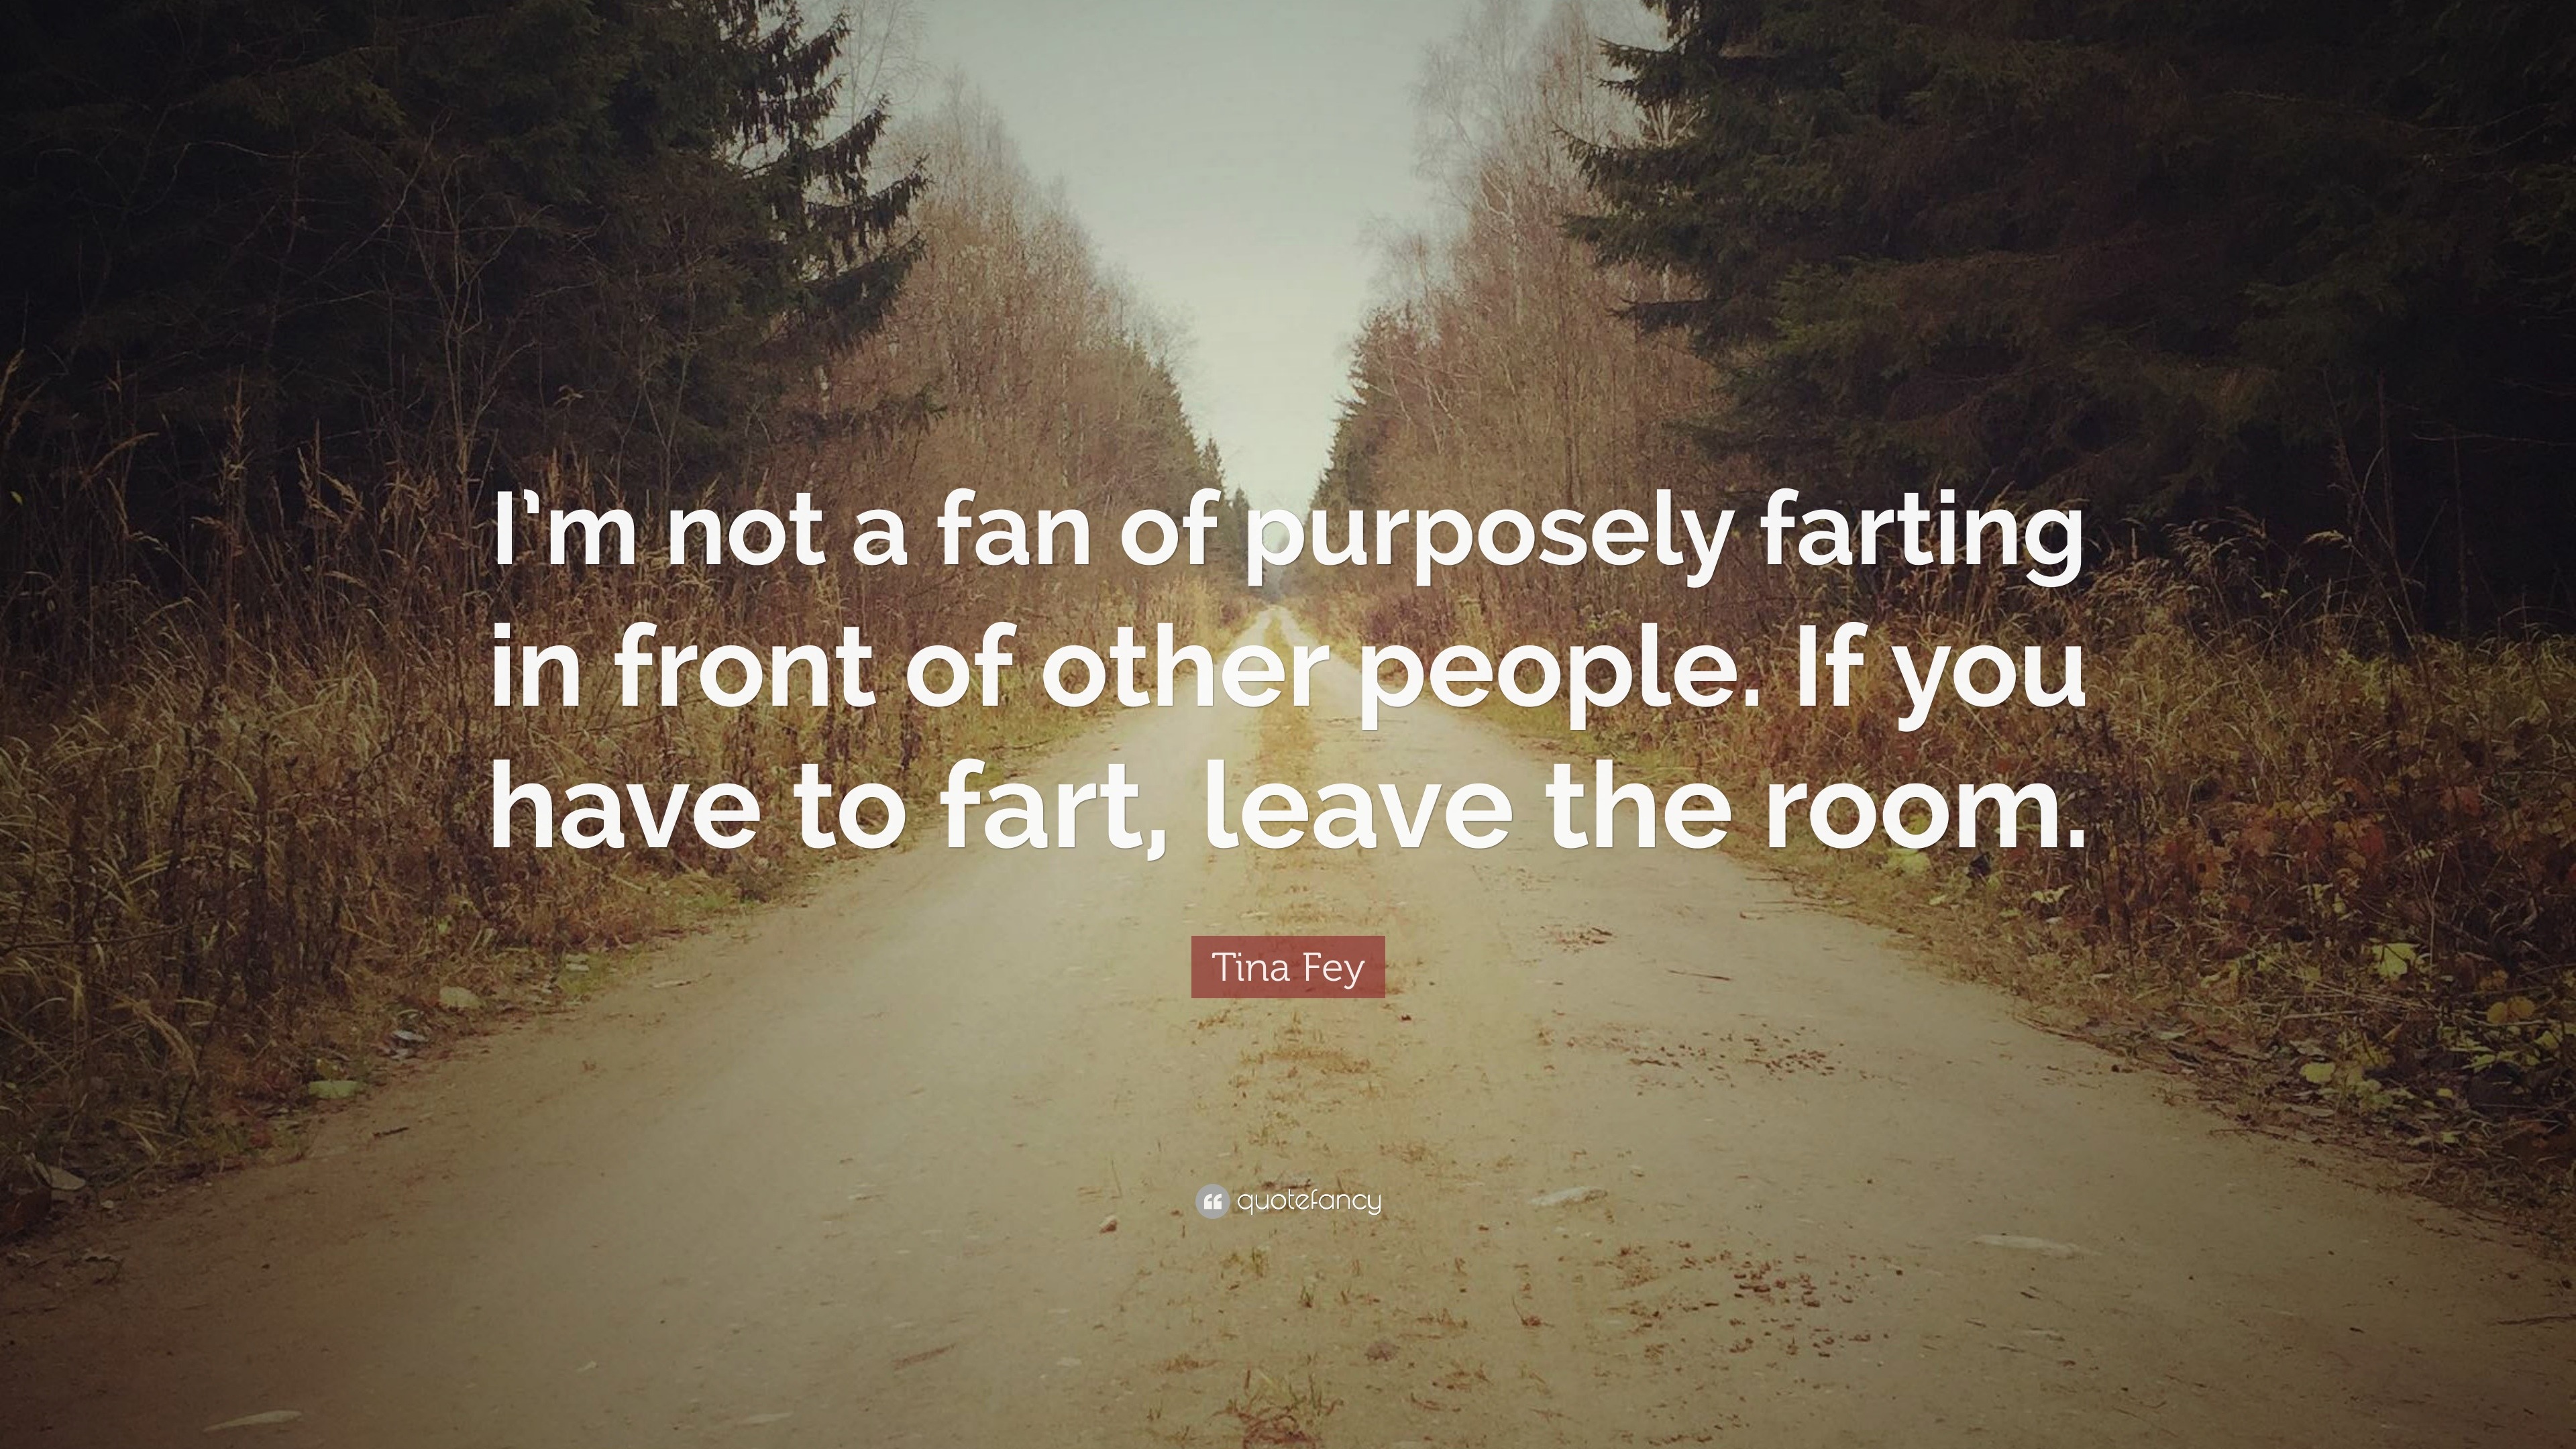 Fey Quote: “I'm not a fan of farting in front of other people.